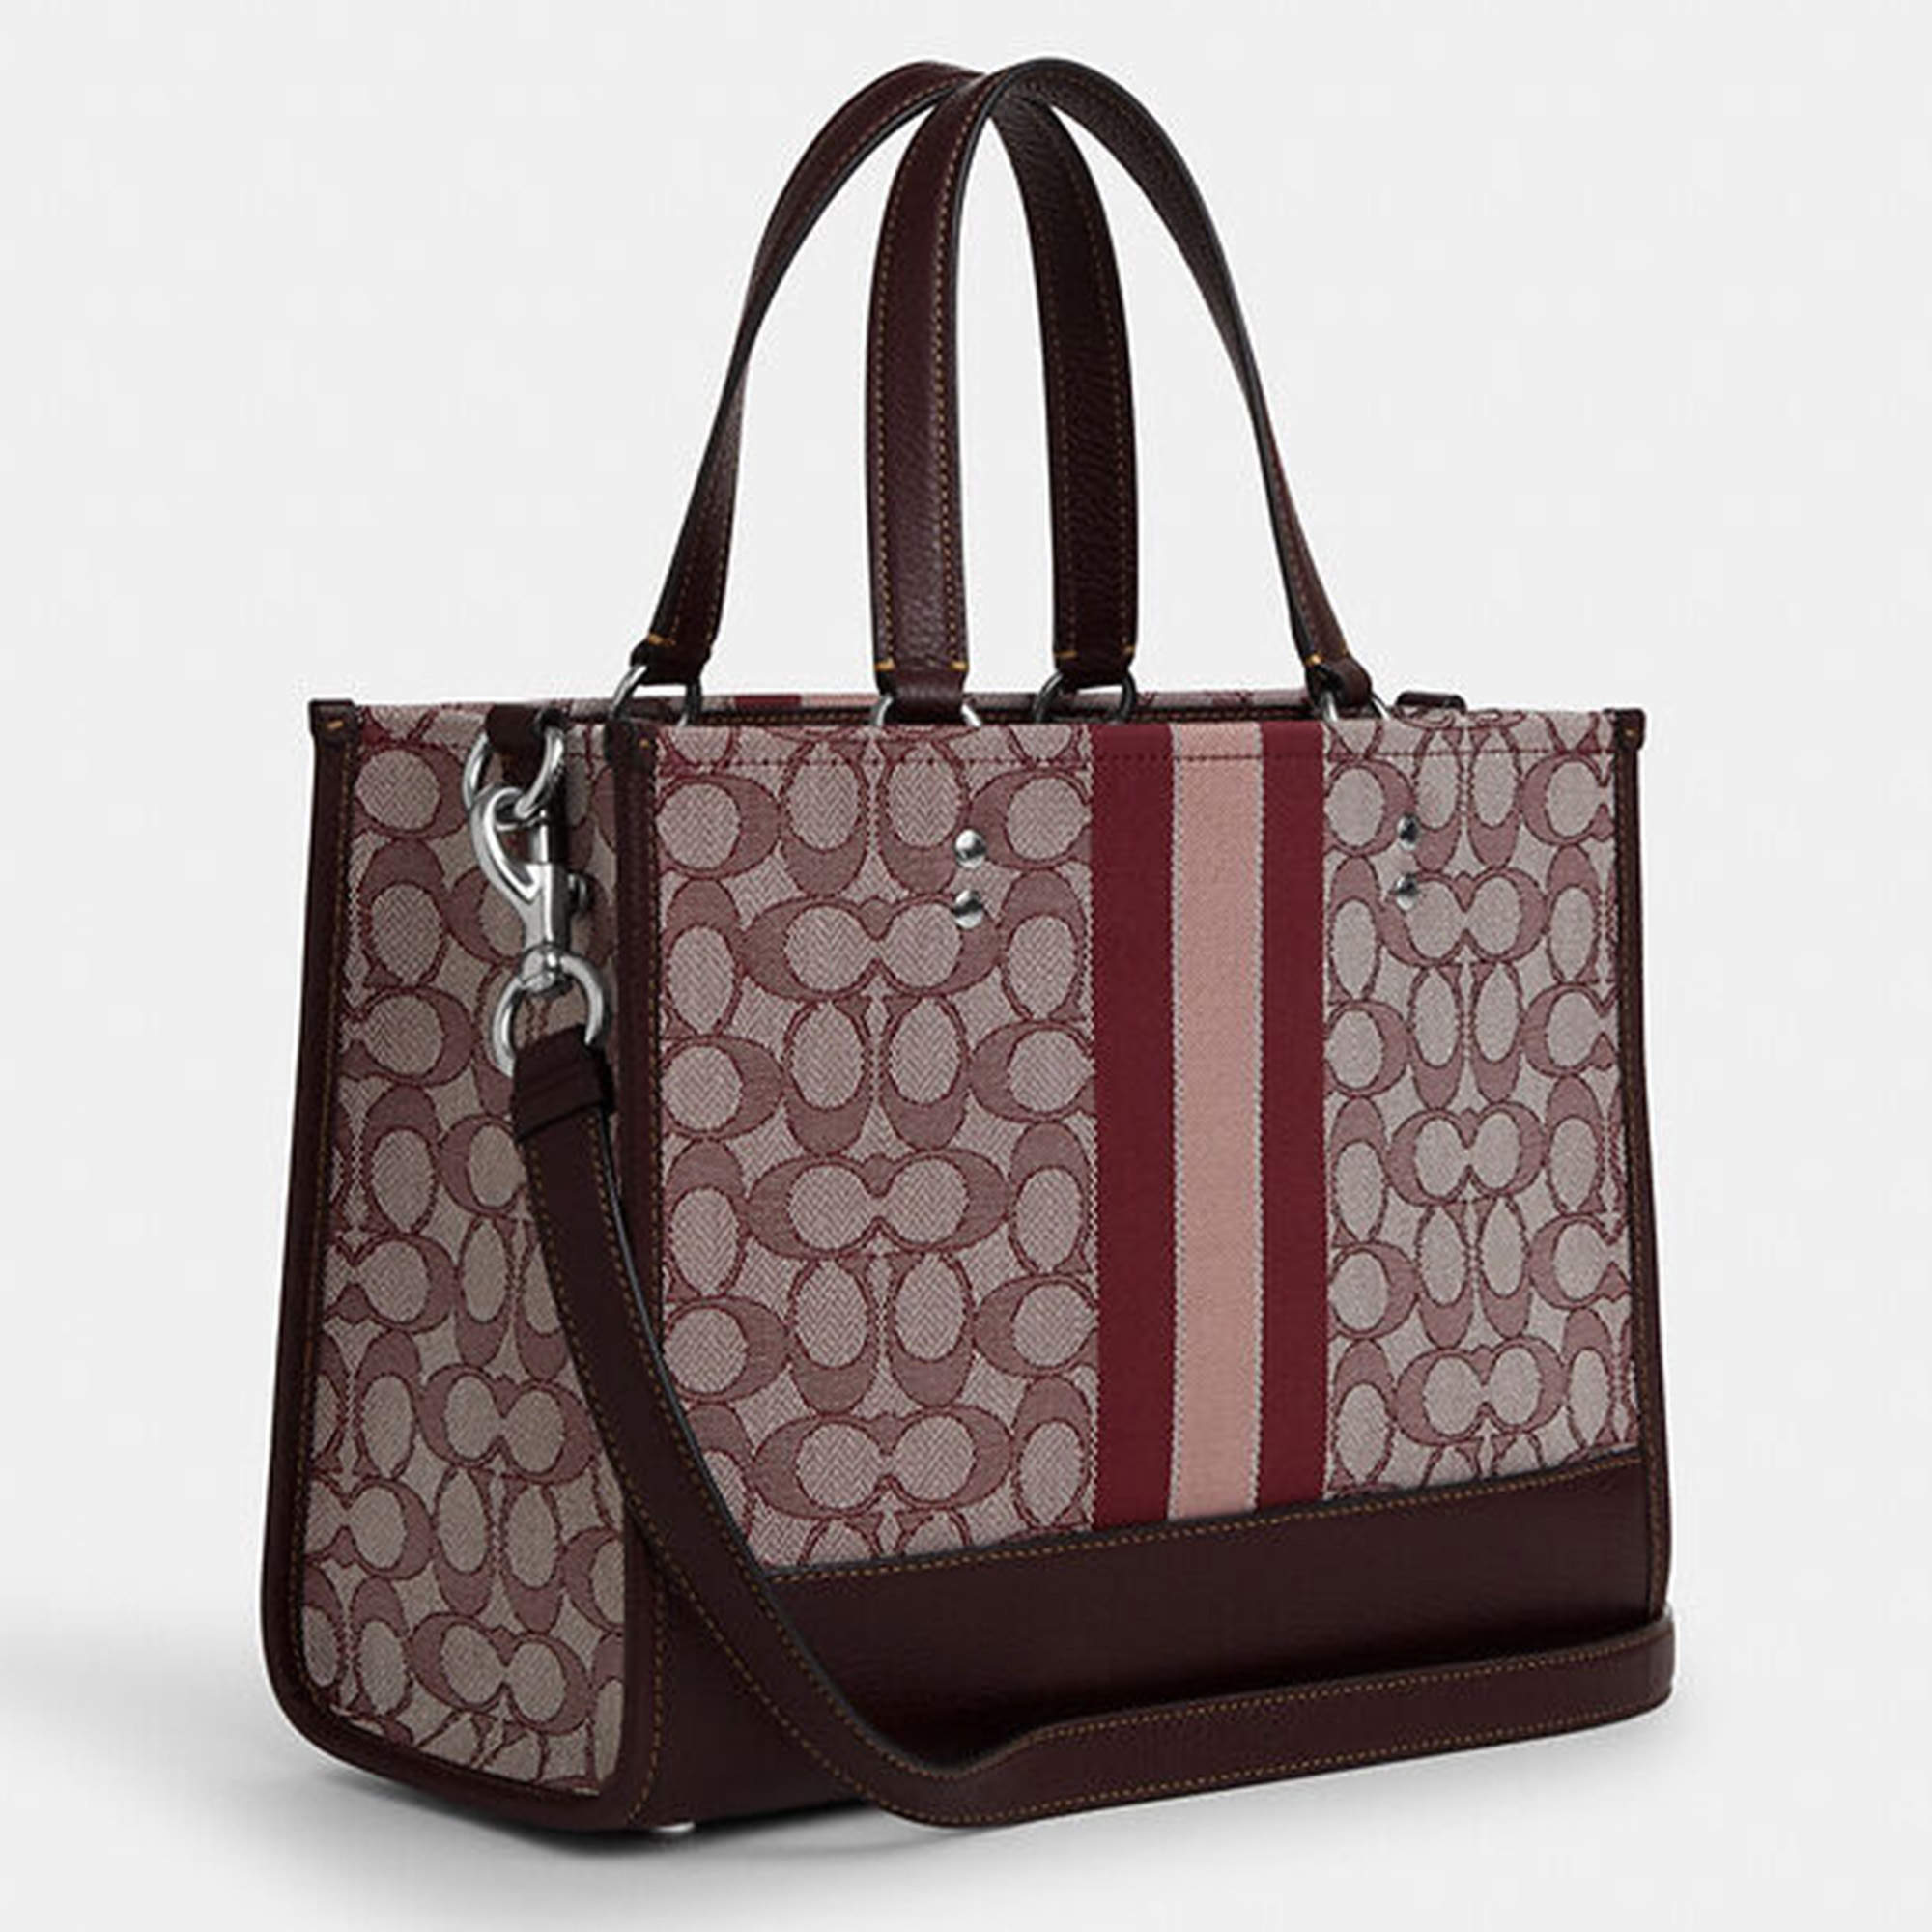 Buy Coach Derby Tote Leather Handbag 58660 at Ubuy India